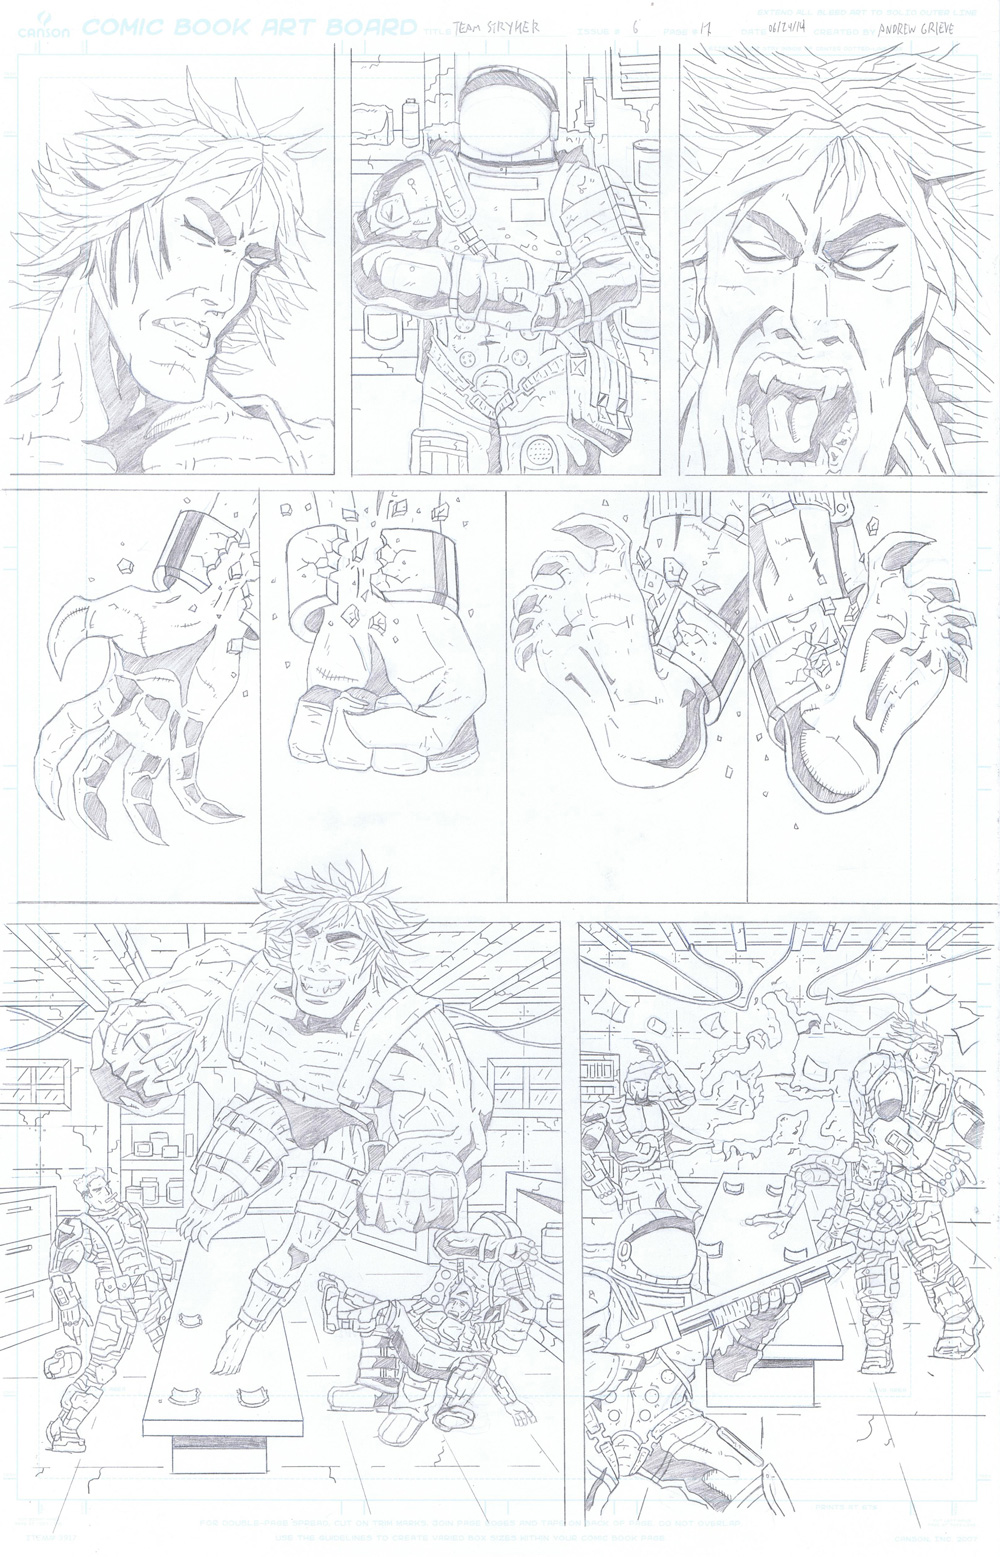 MISSION 006: PAGE 17 PENCIL